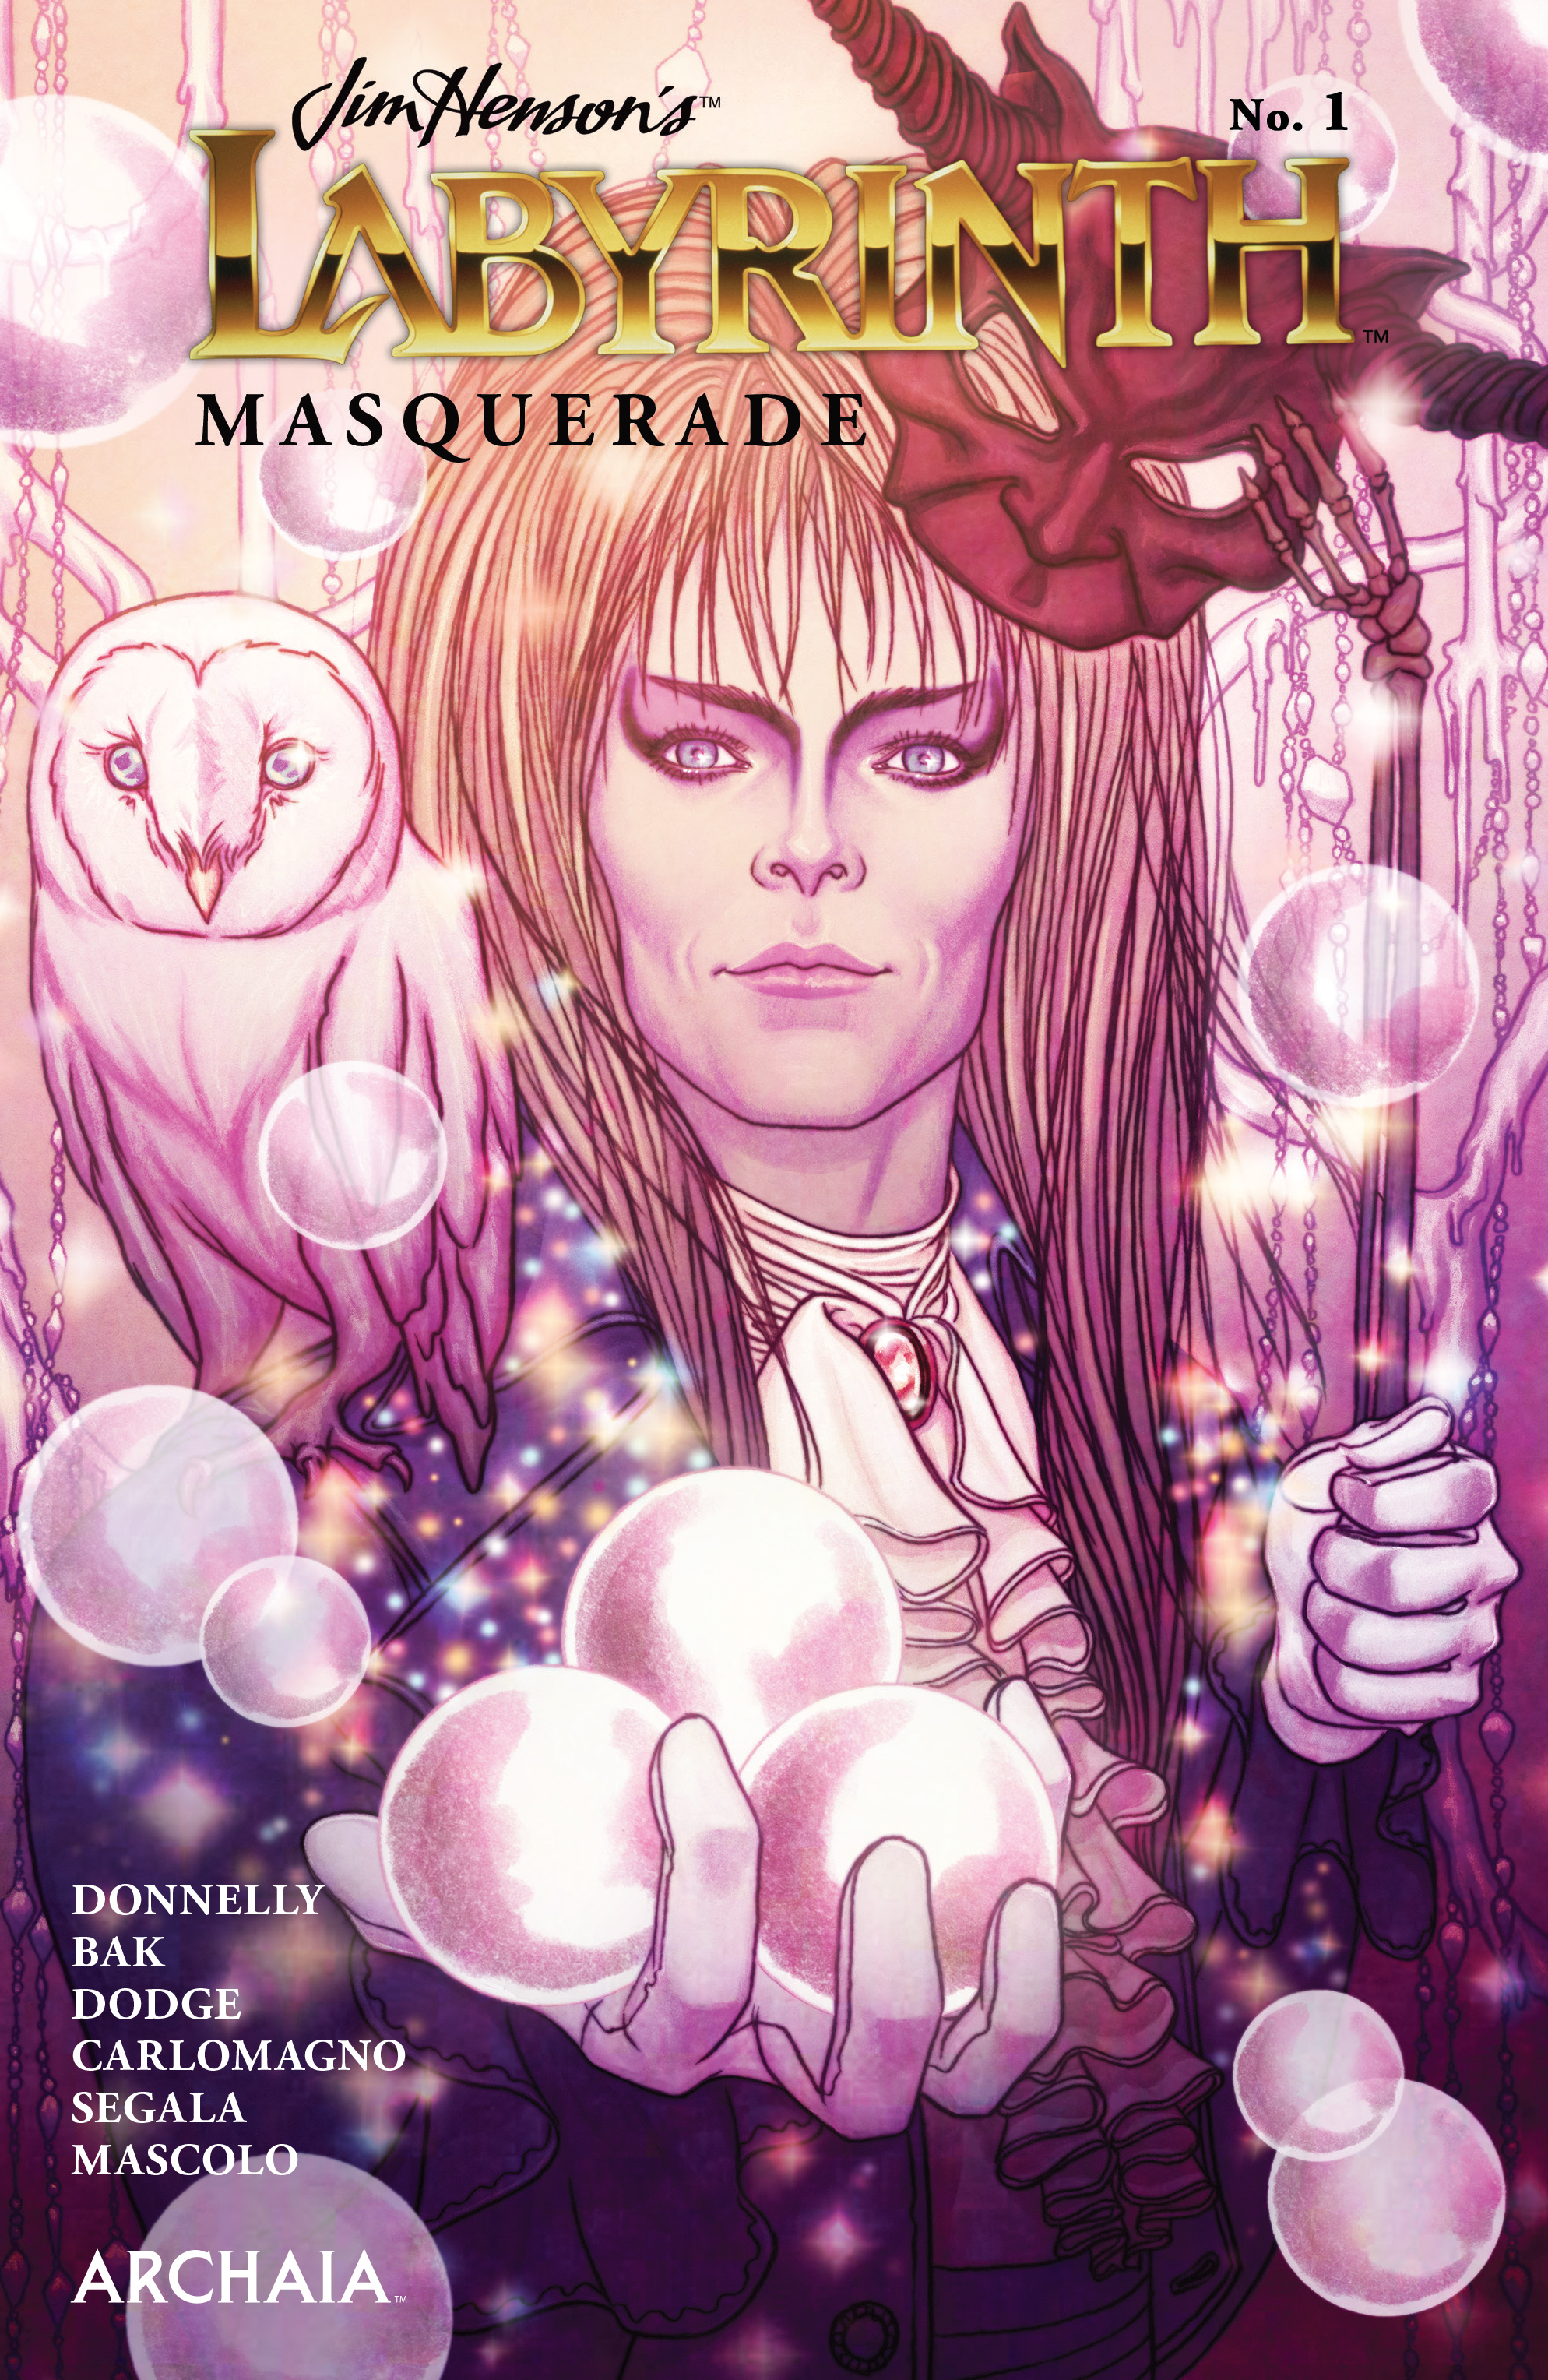 Read online Jim Henson's Labyrinth: Masquerade comic -  Issue # Full - 1